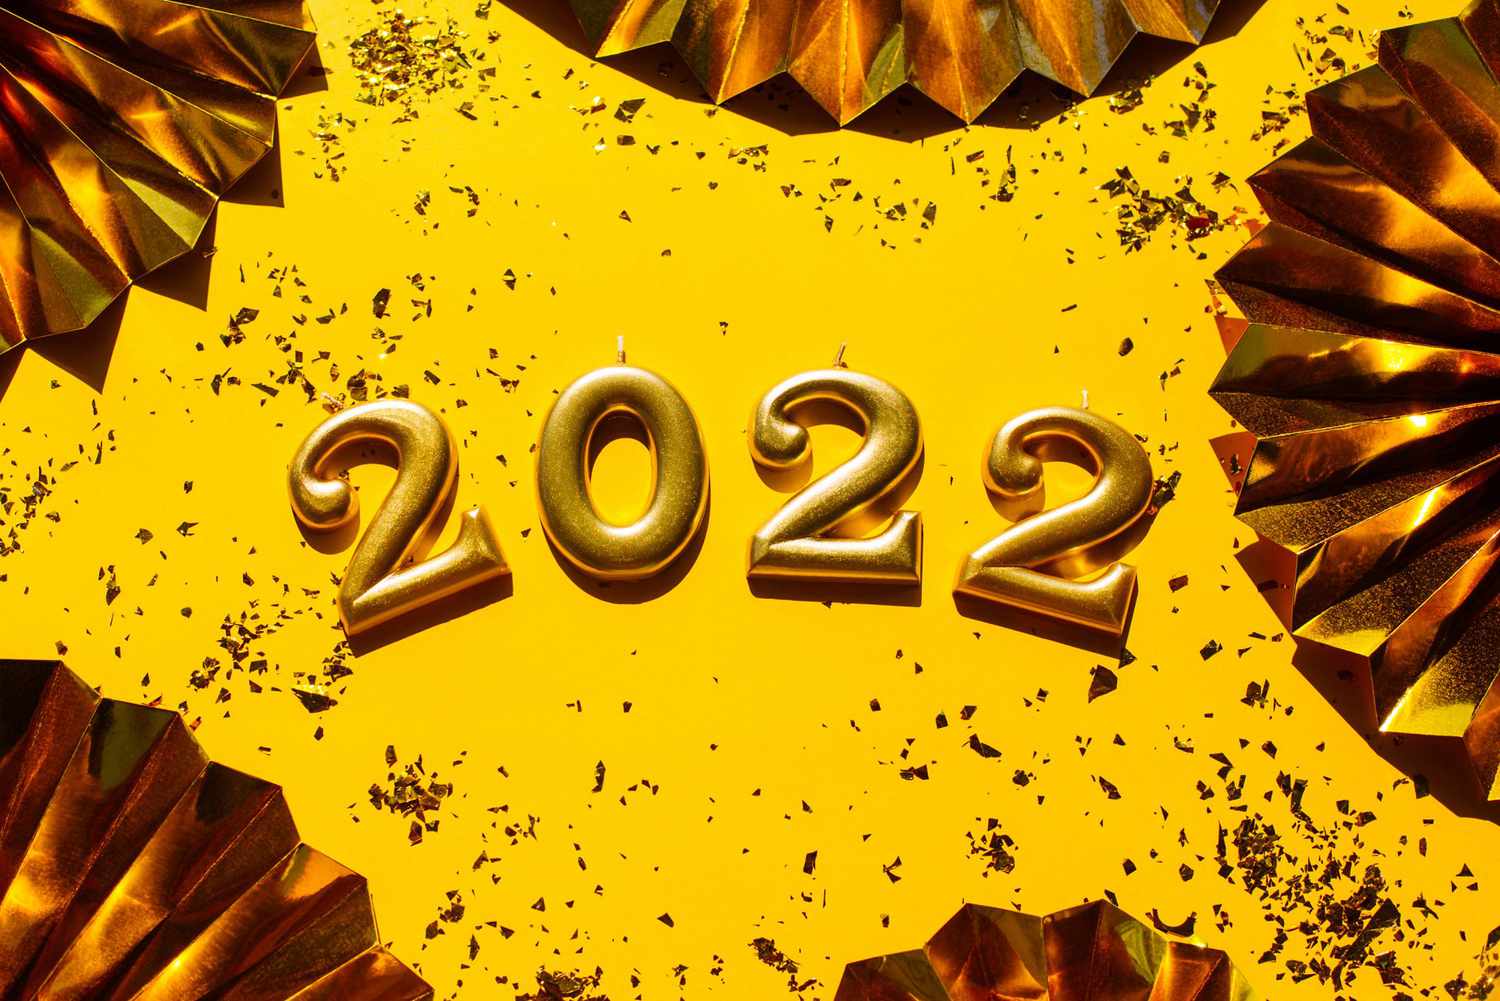 From above composition with 2022 number on bright yellow surface with golden glitter stars and scattered spangles for New Year holiday decorations